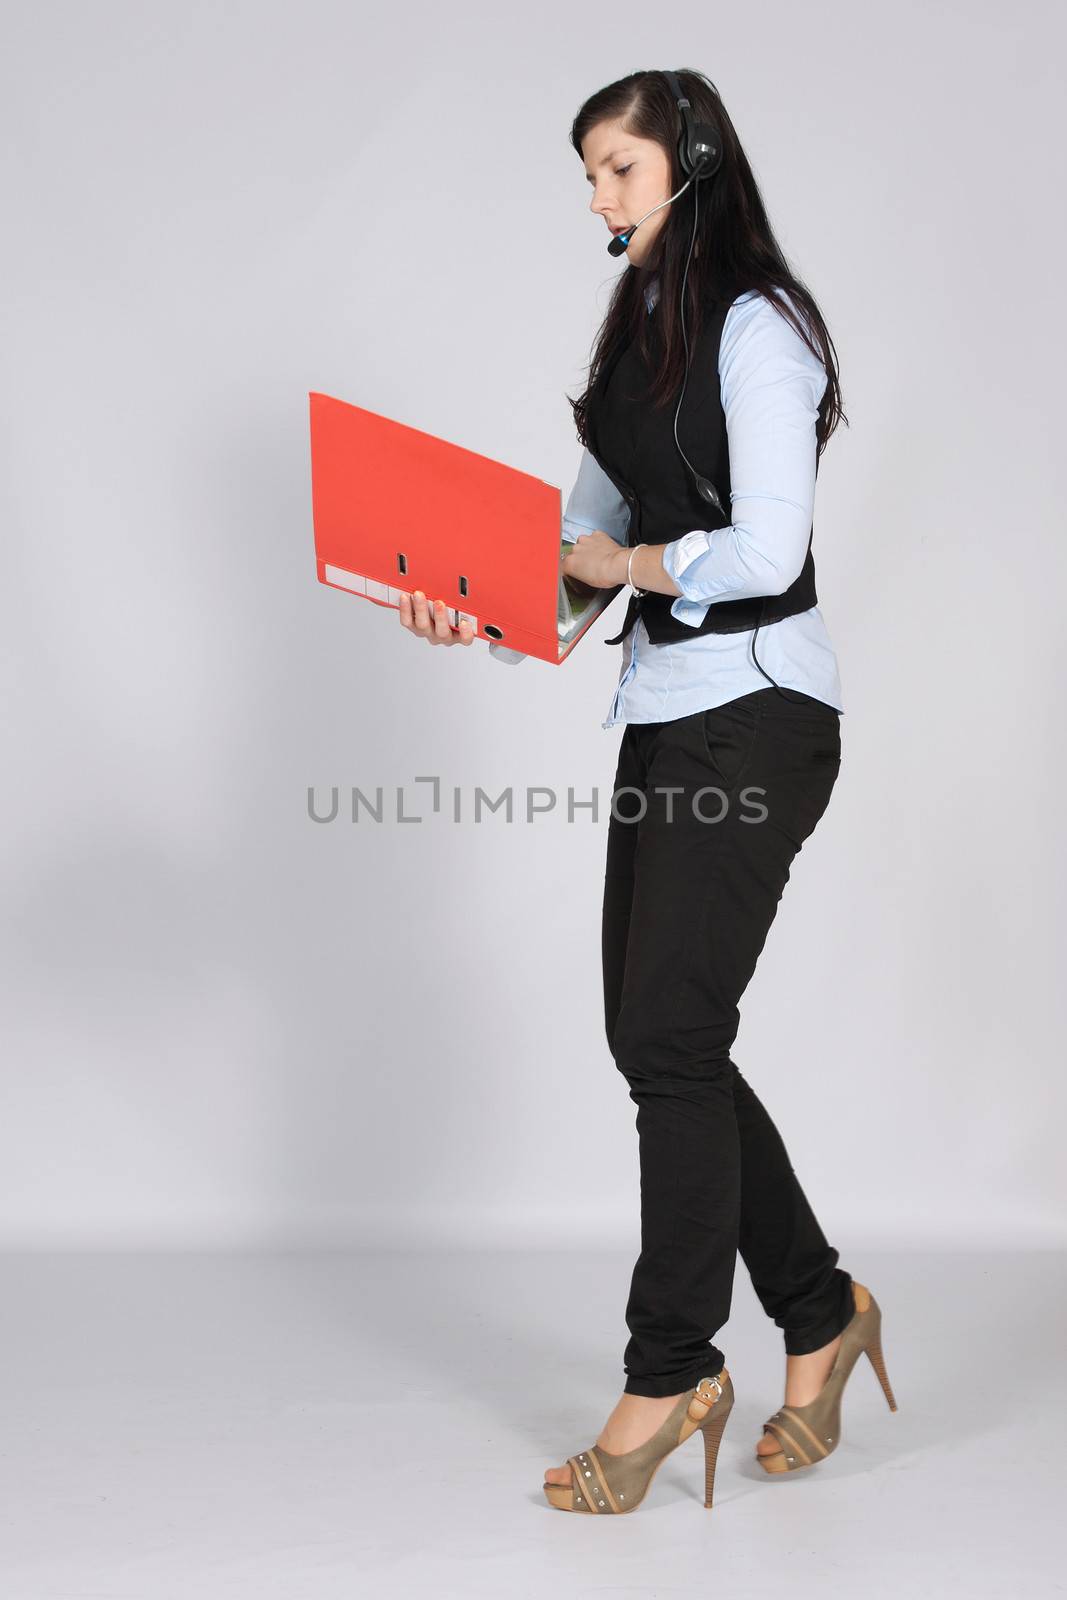 Young woman with headset phone while walking and holding hands a pile of documents